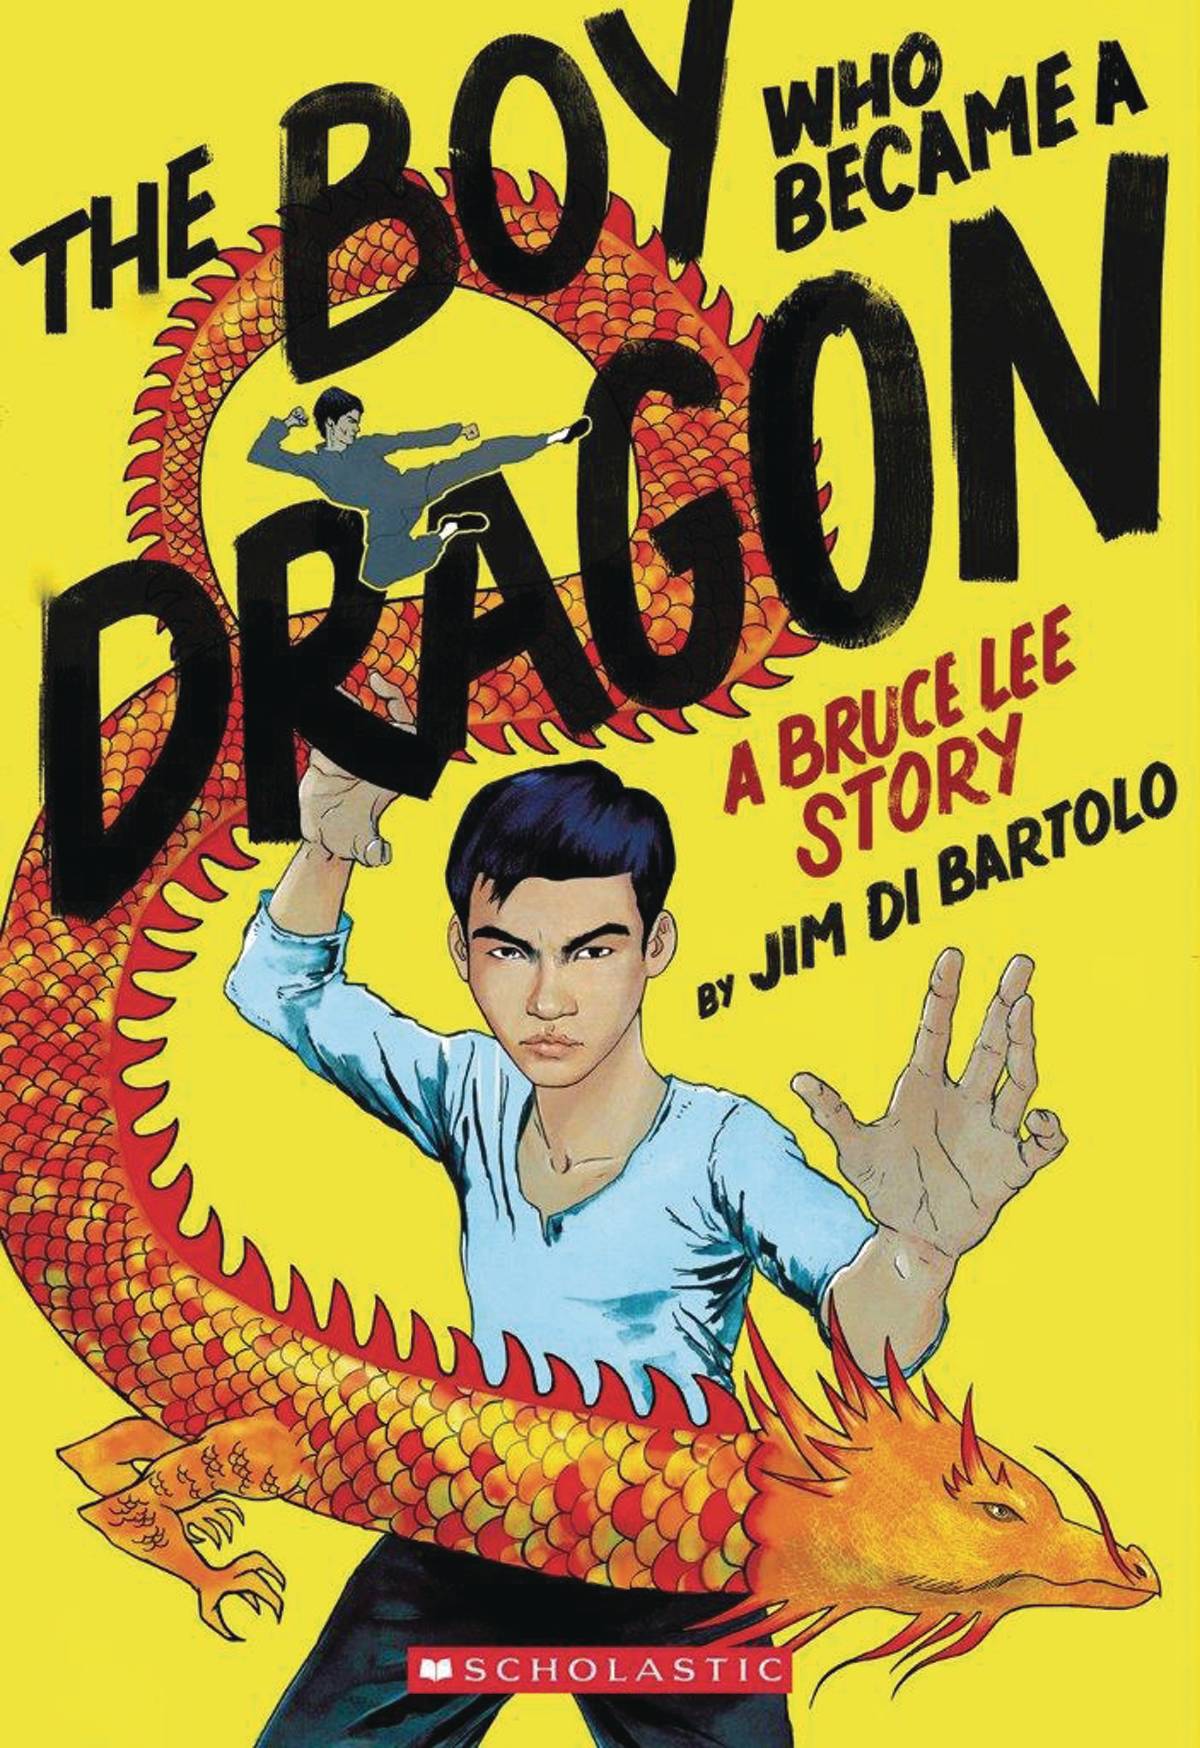 Boy Who Became A Dragon Bruce Lee Story Soft Cover Graphic Novel